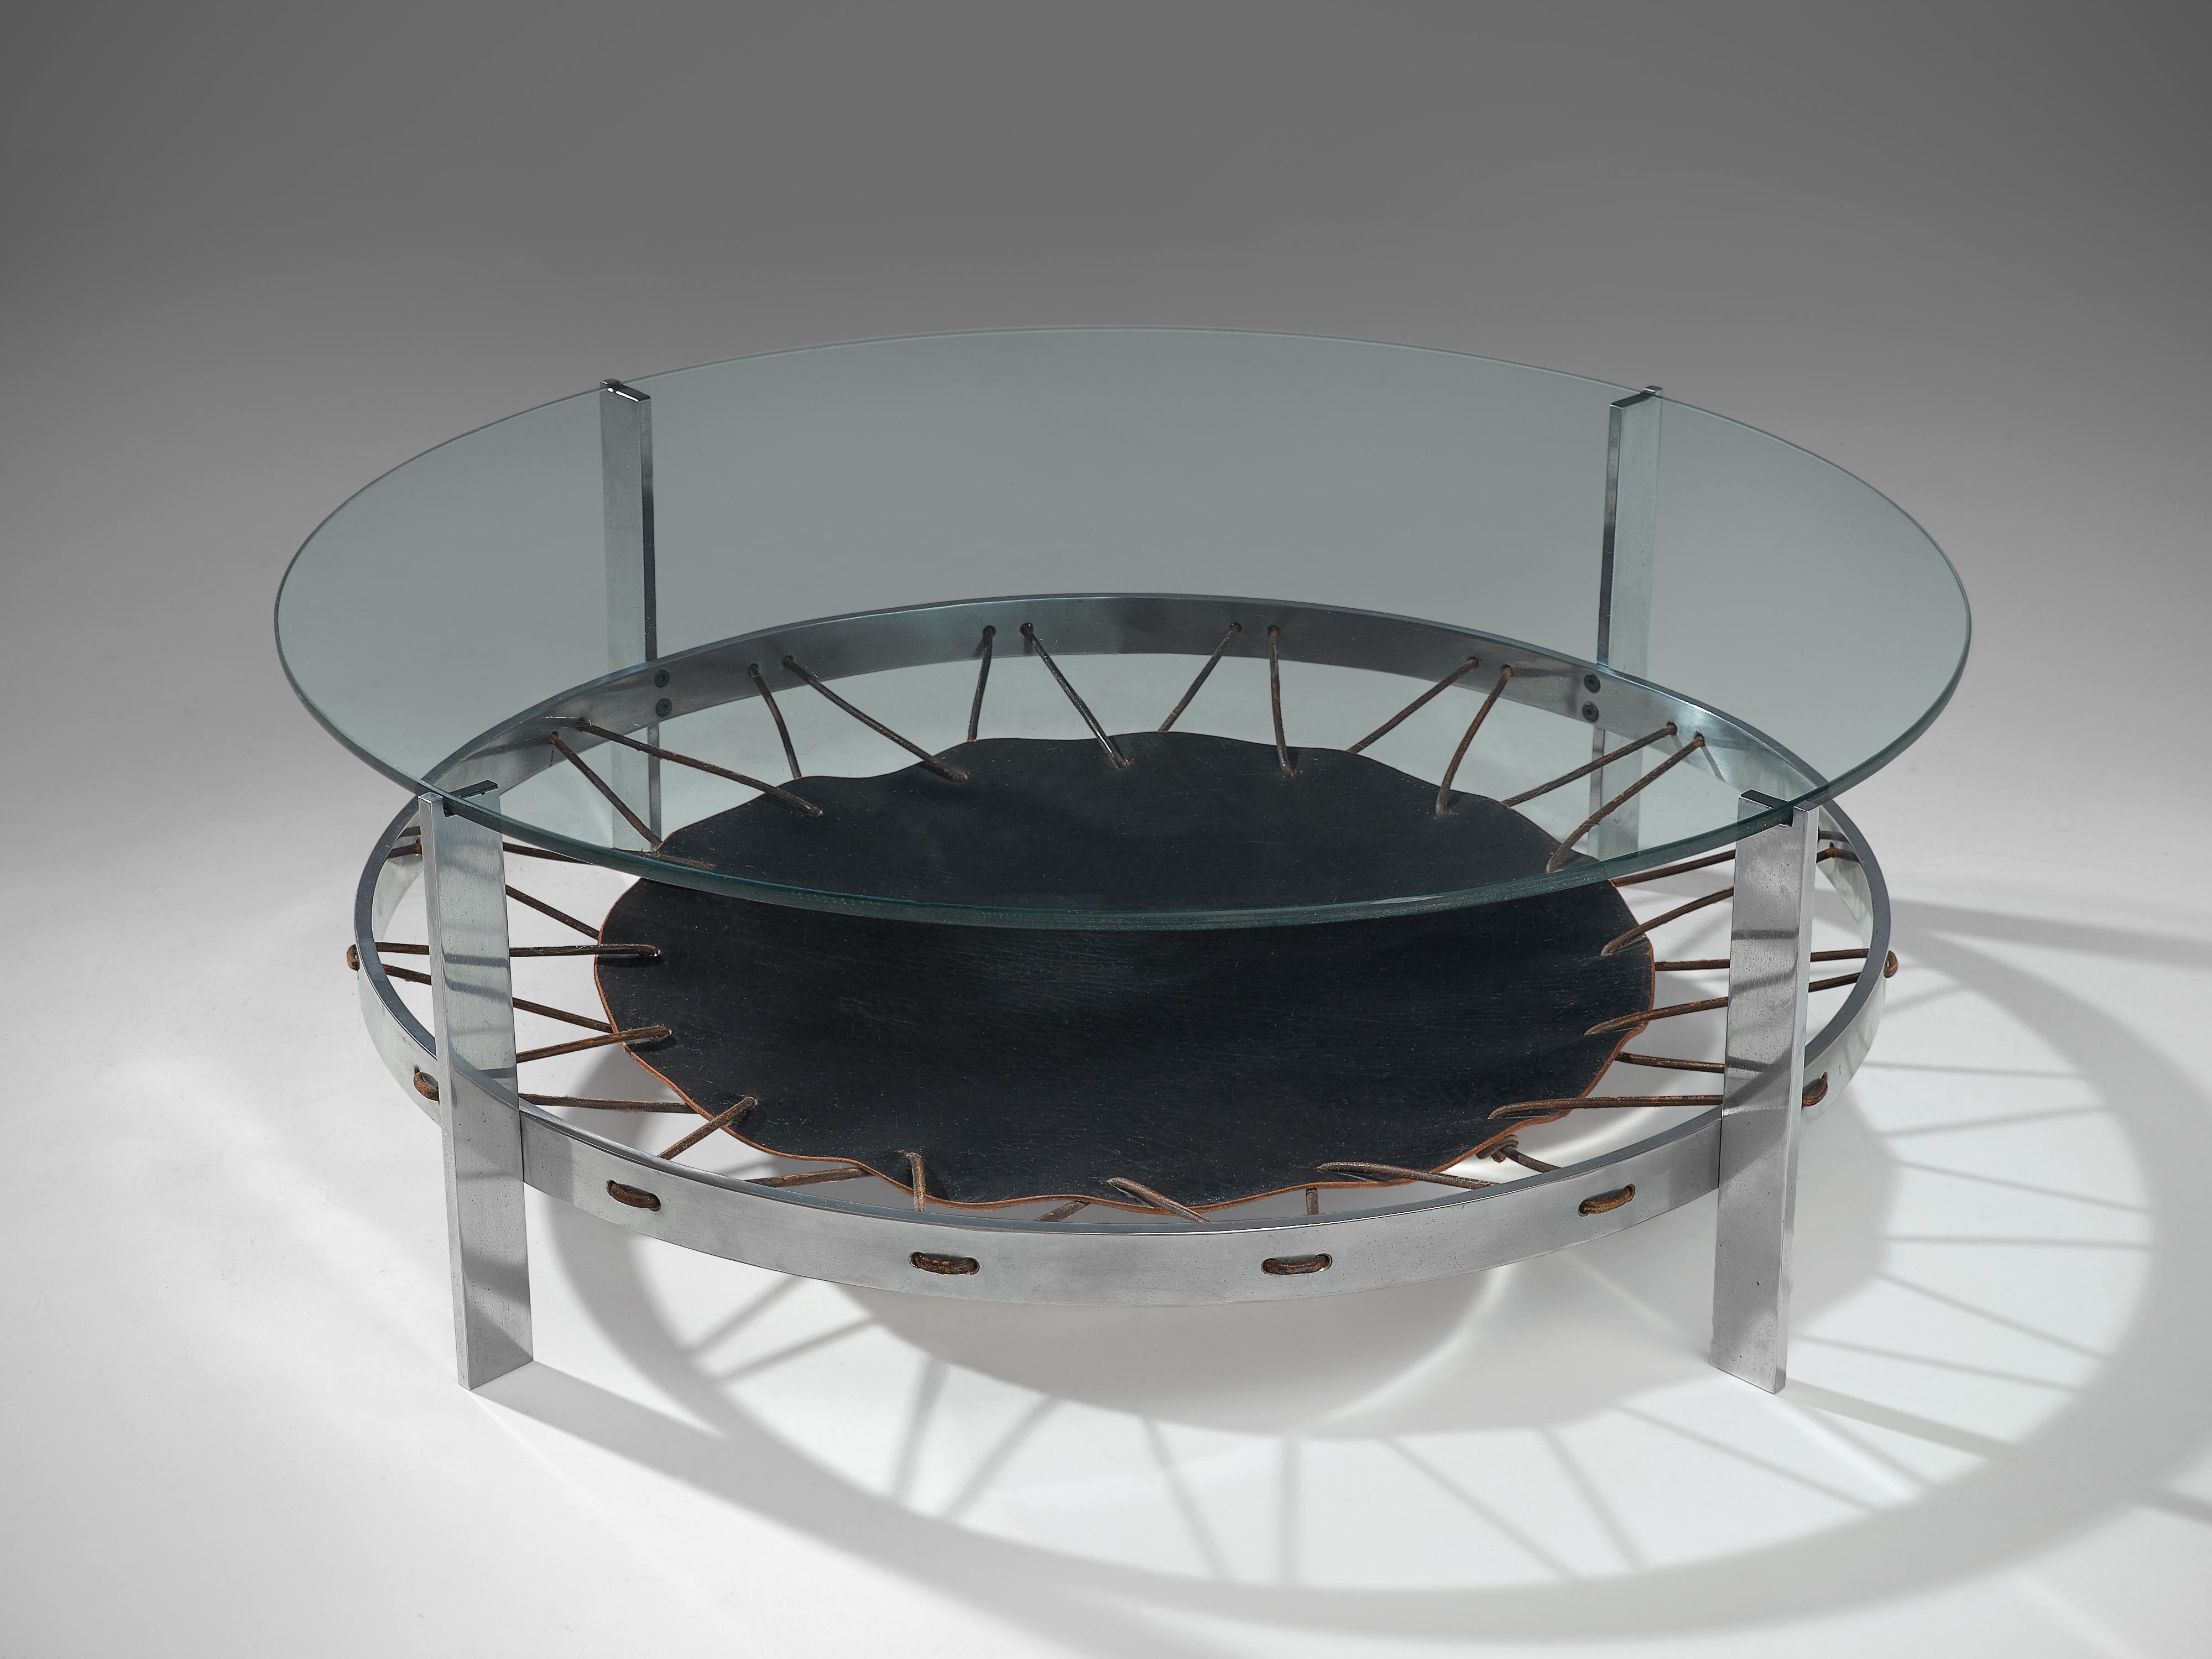 Coffee table, leather, glass and steel, the Netherlands, 1970s

Round coffee table with a superb combination of materials. The chrome base and glass top are very strand materials on itself, but in combination with the black leather the appearance of